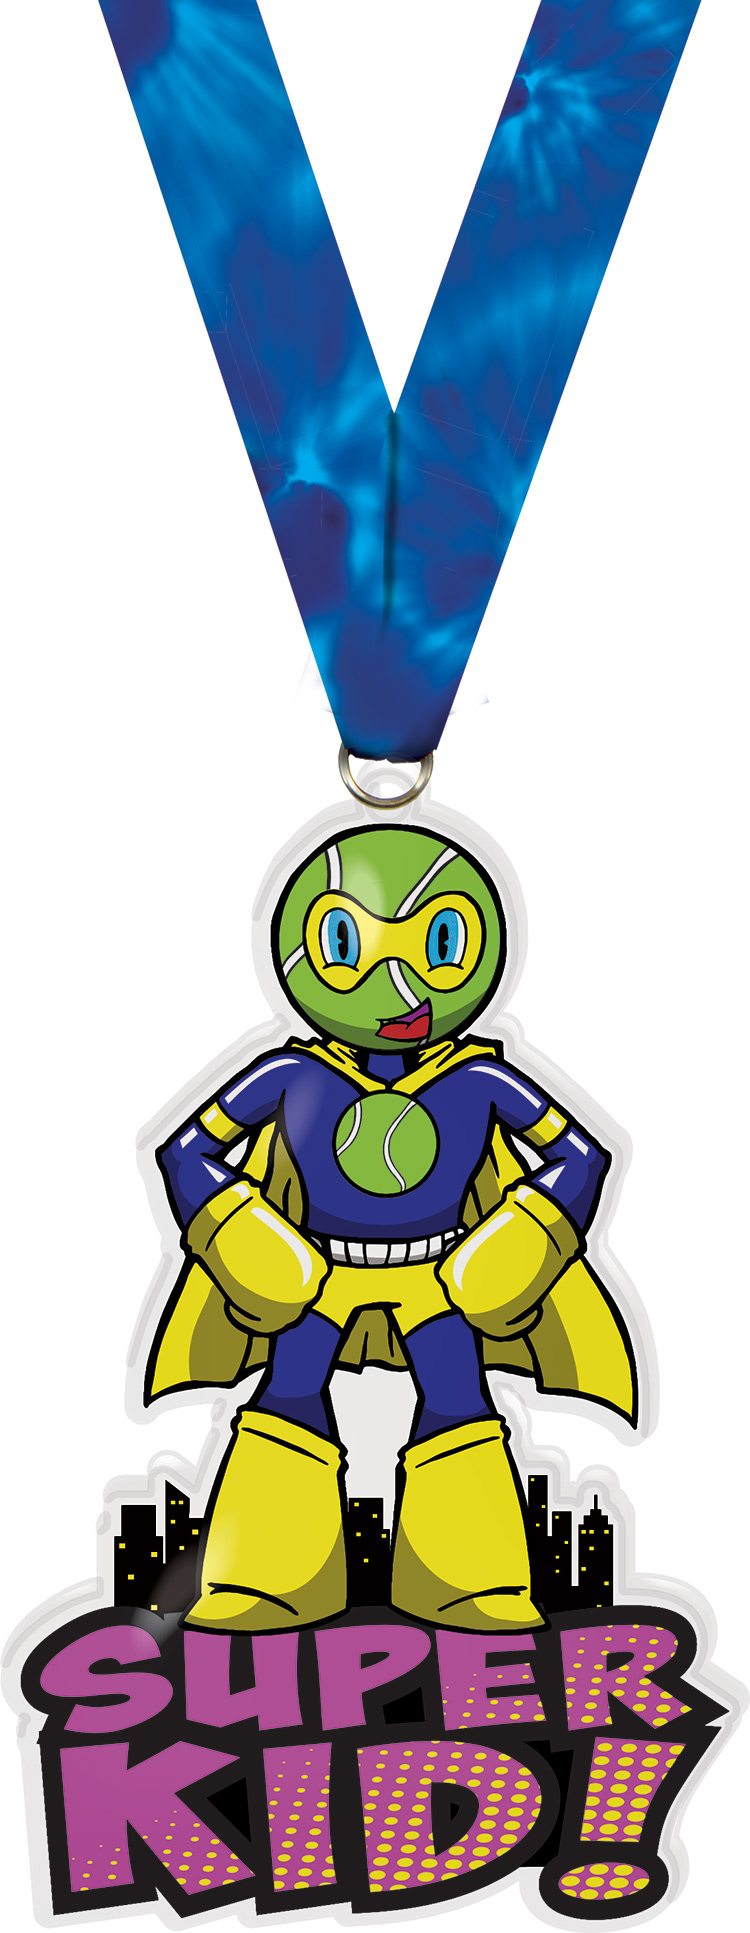 Exclusive Tennis Super Kid Acrylic Medal- 6 inch